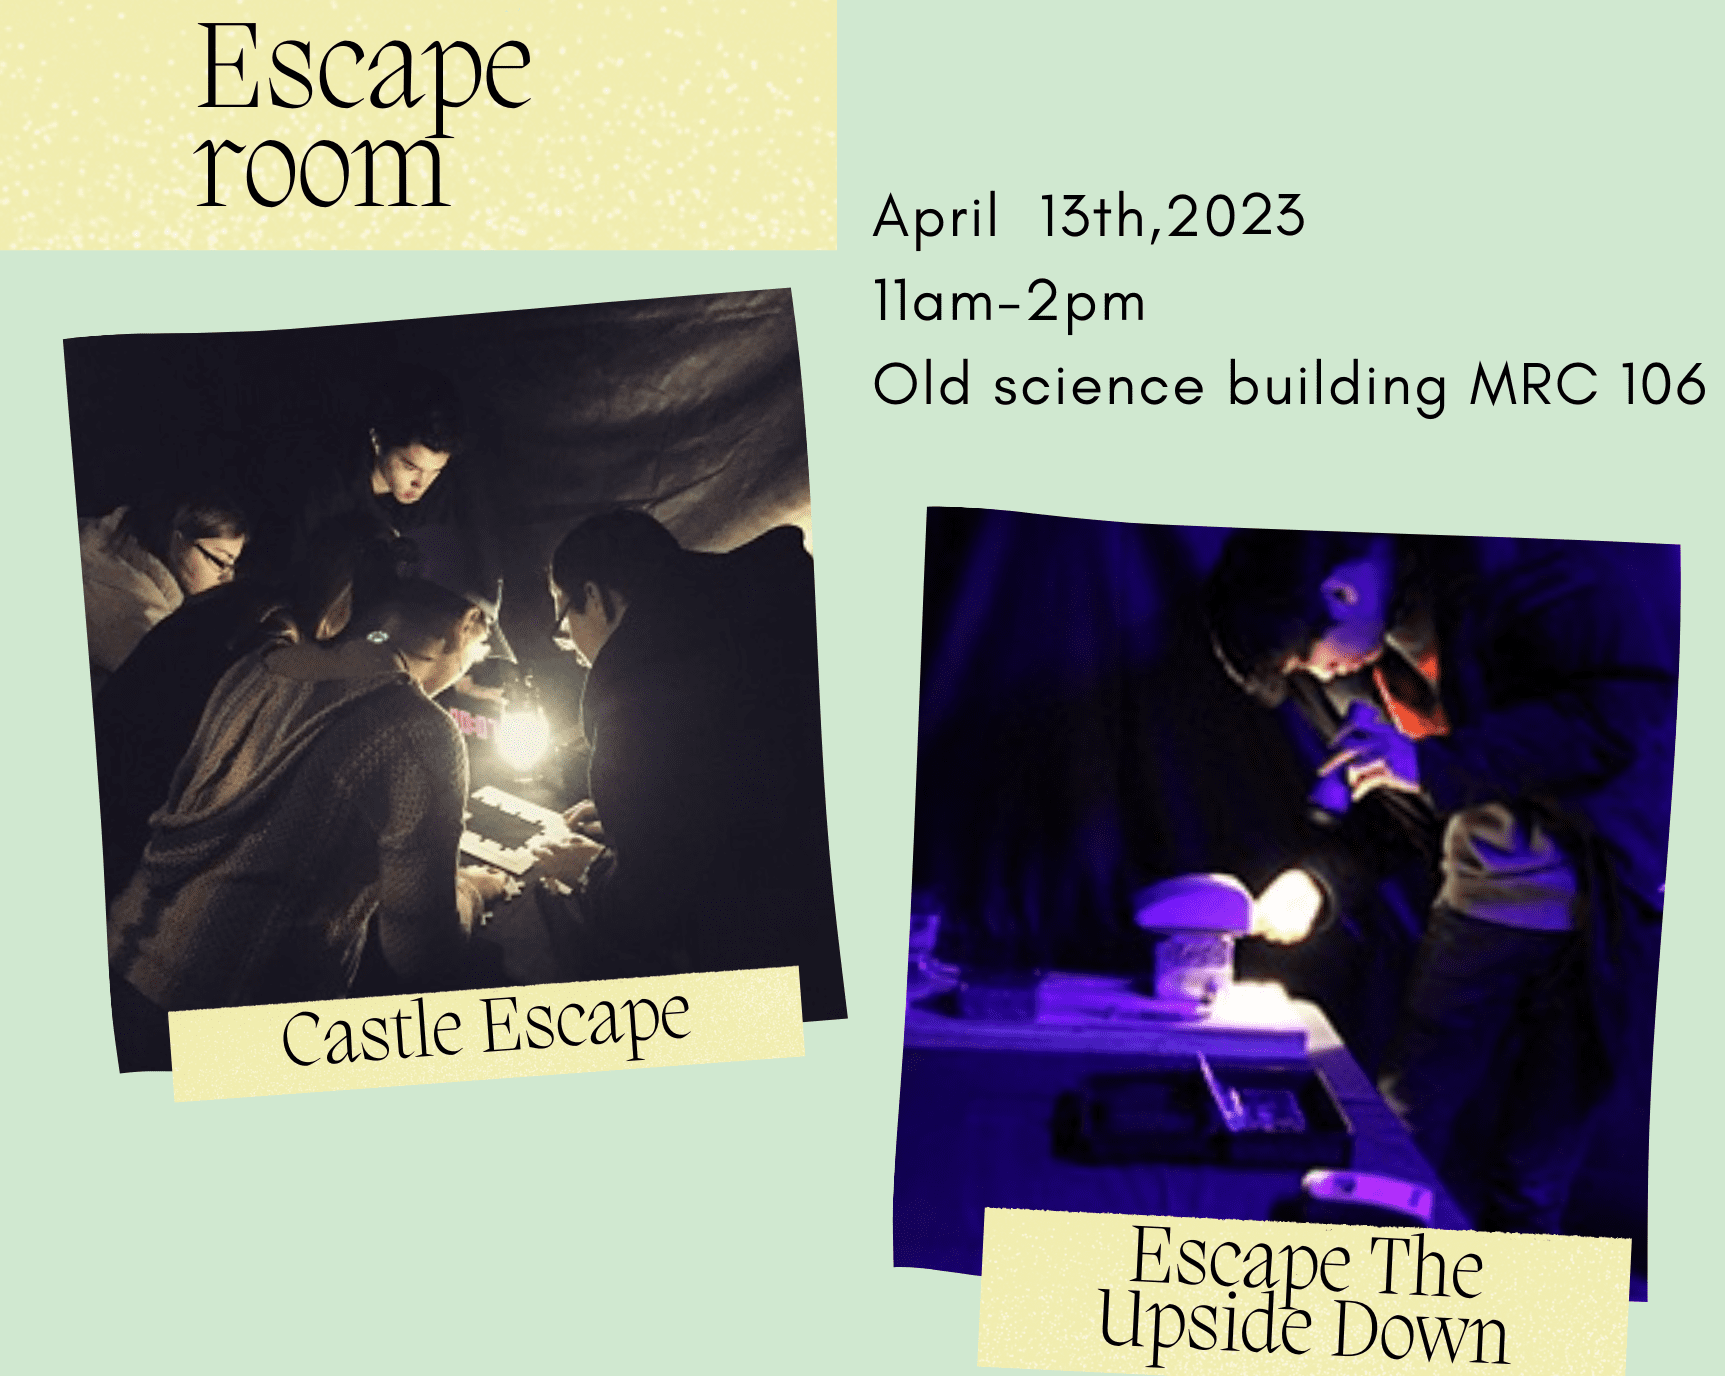 Escape Room! April 13, 2023 from 11:00 am - 2:00 pm in Science 106